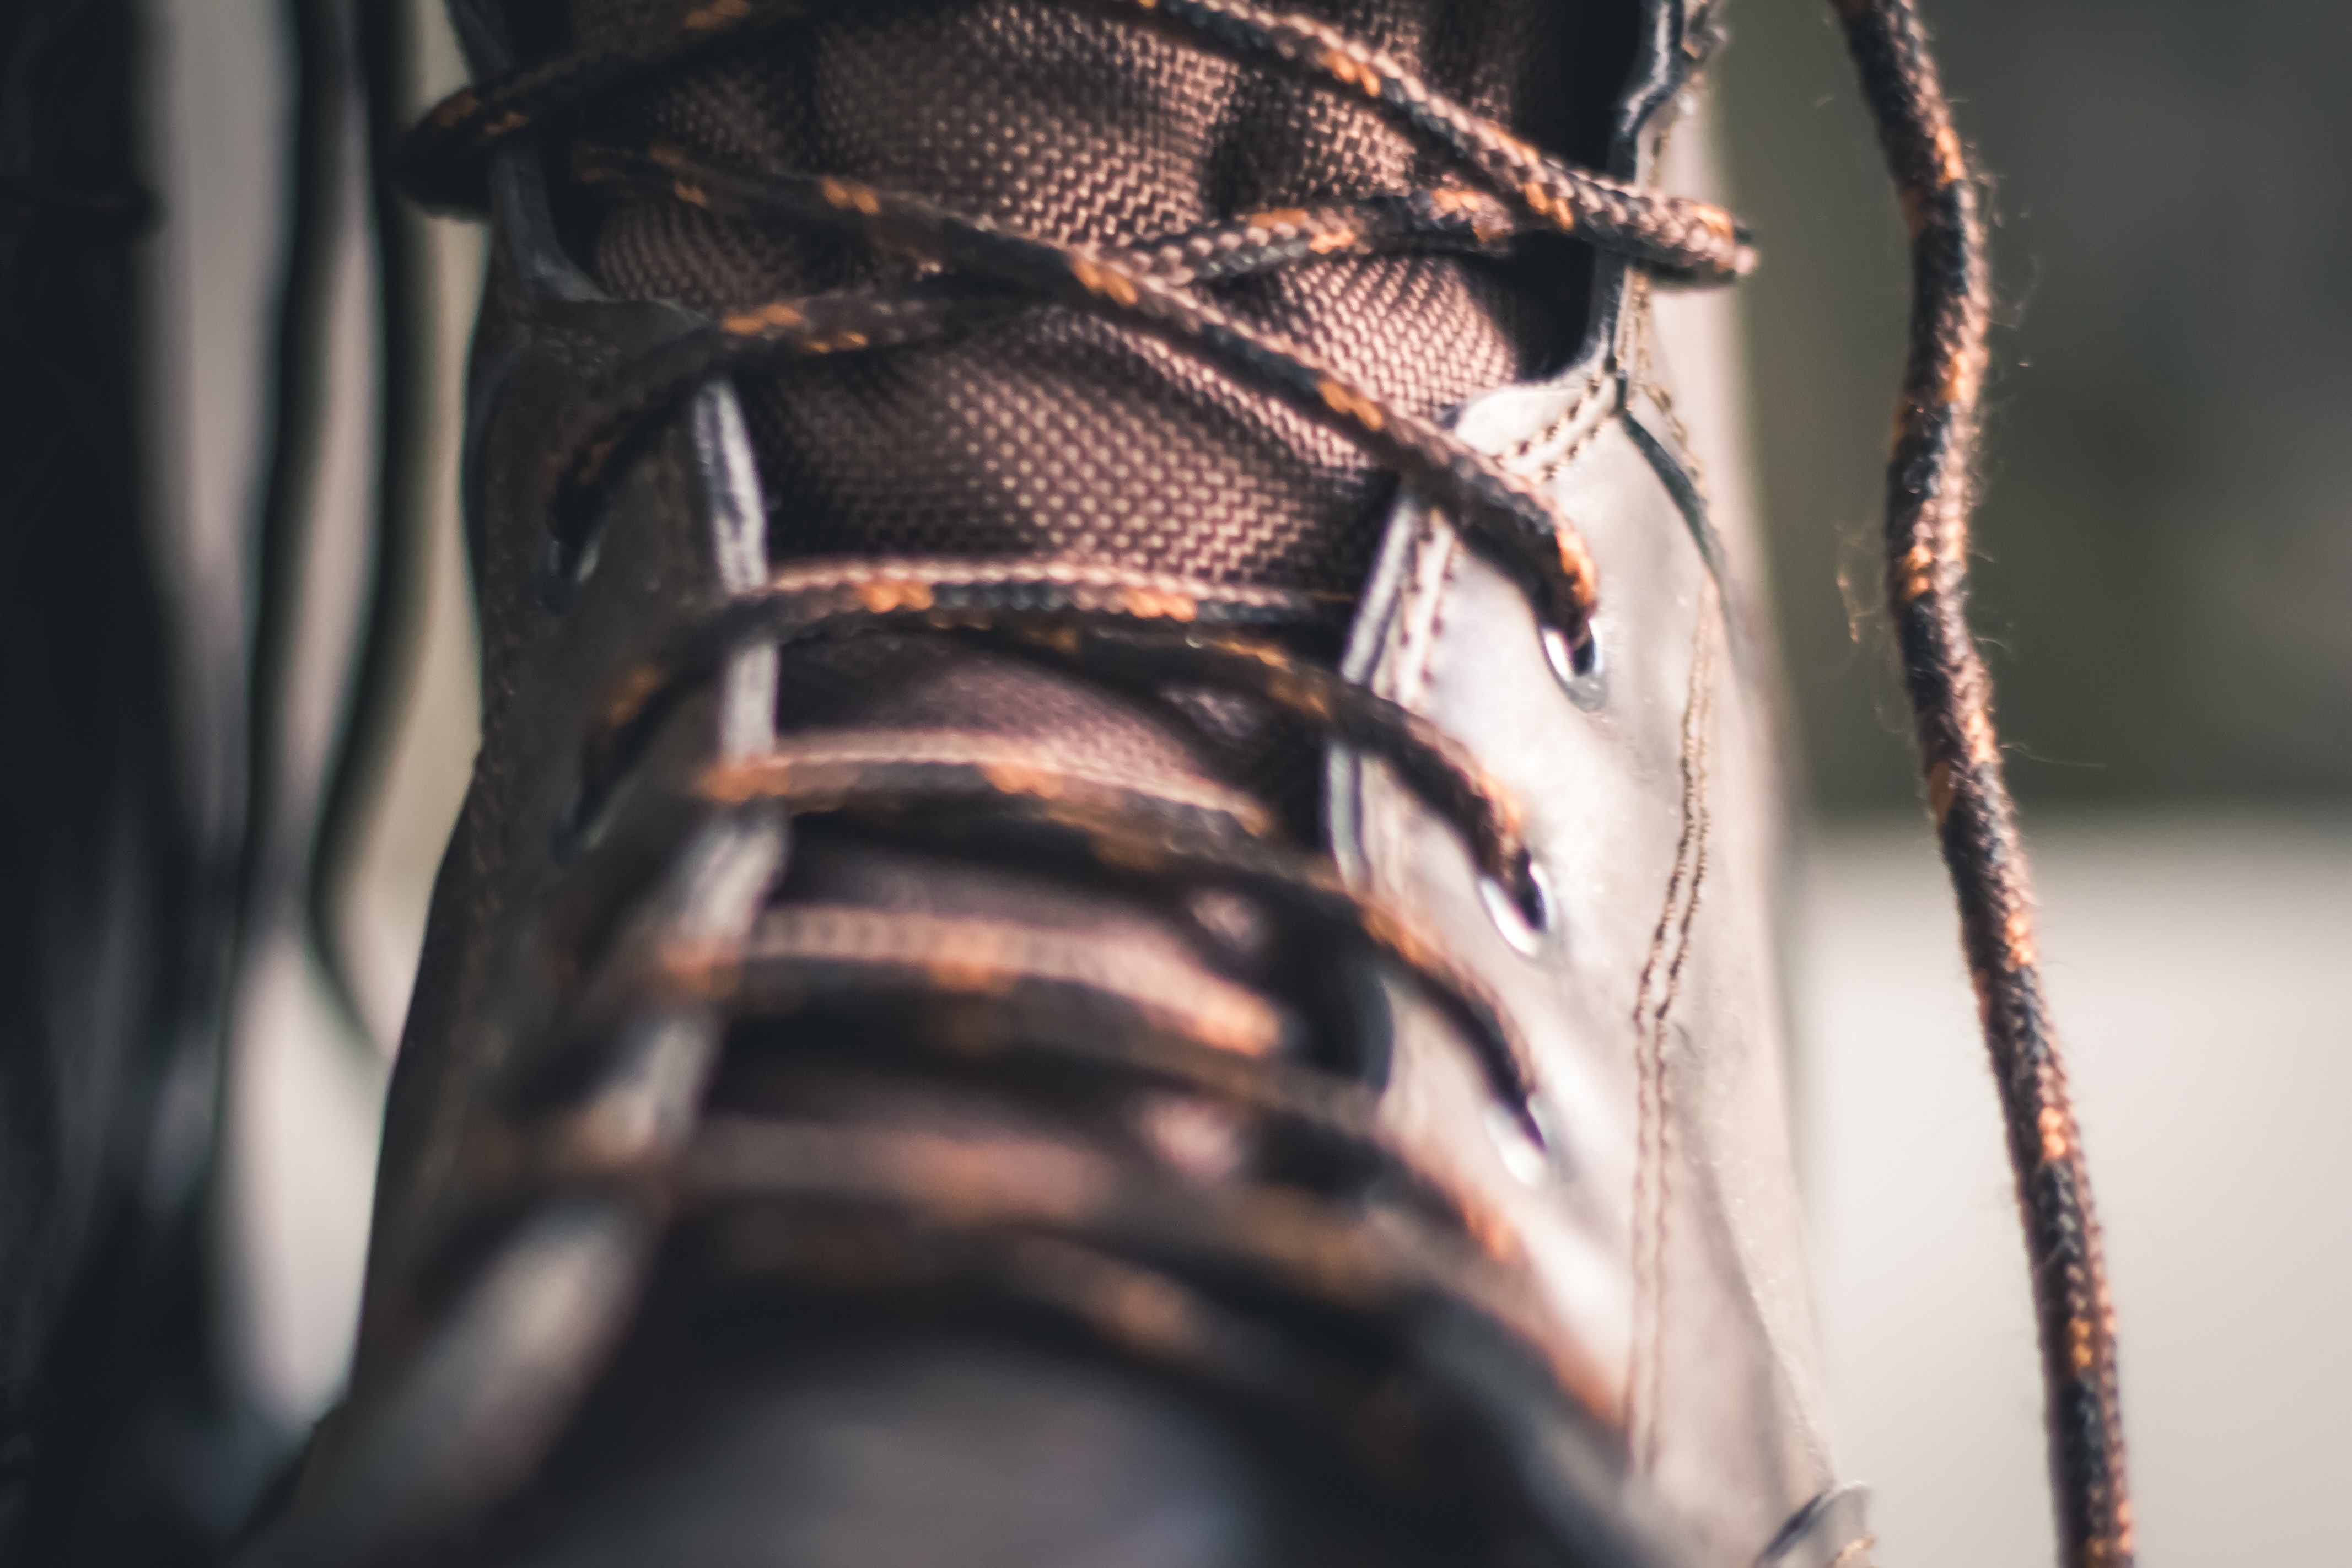 Adjust the laces on boots to help achieve a better fit.